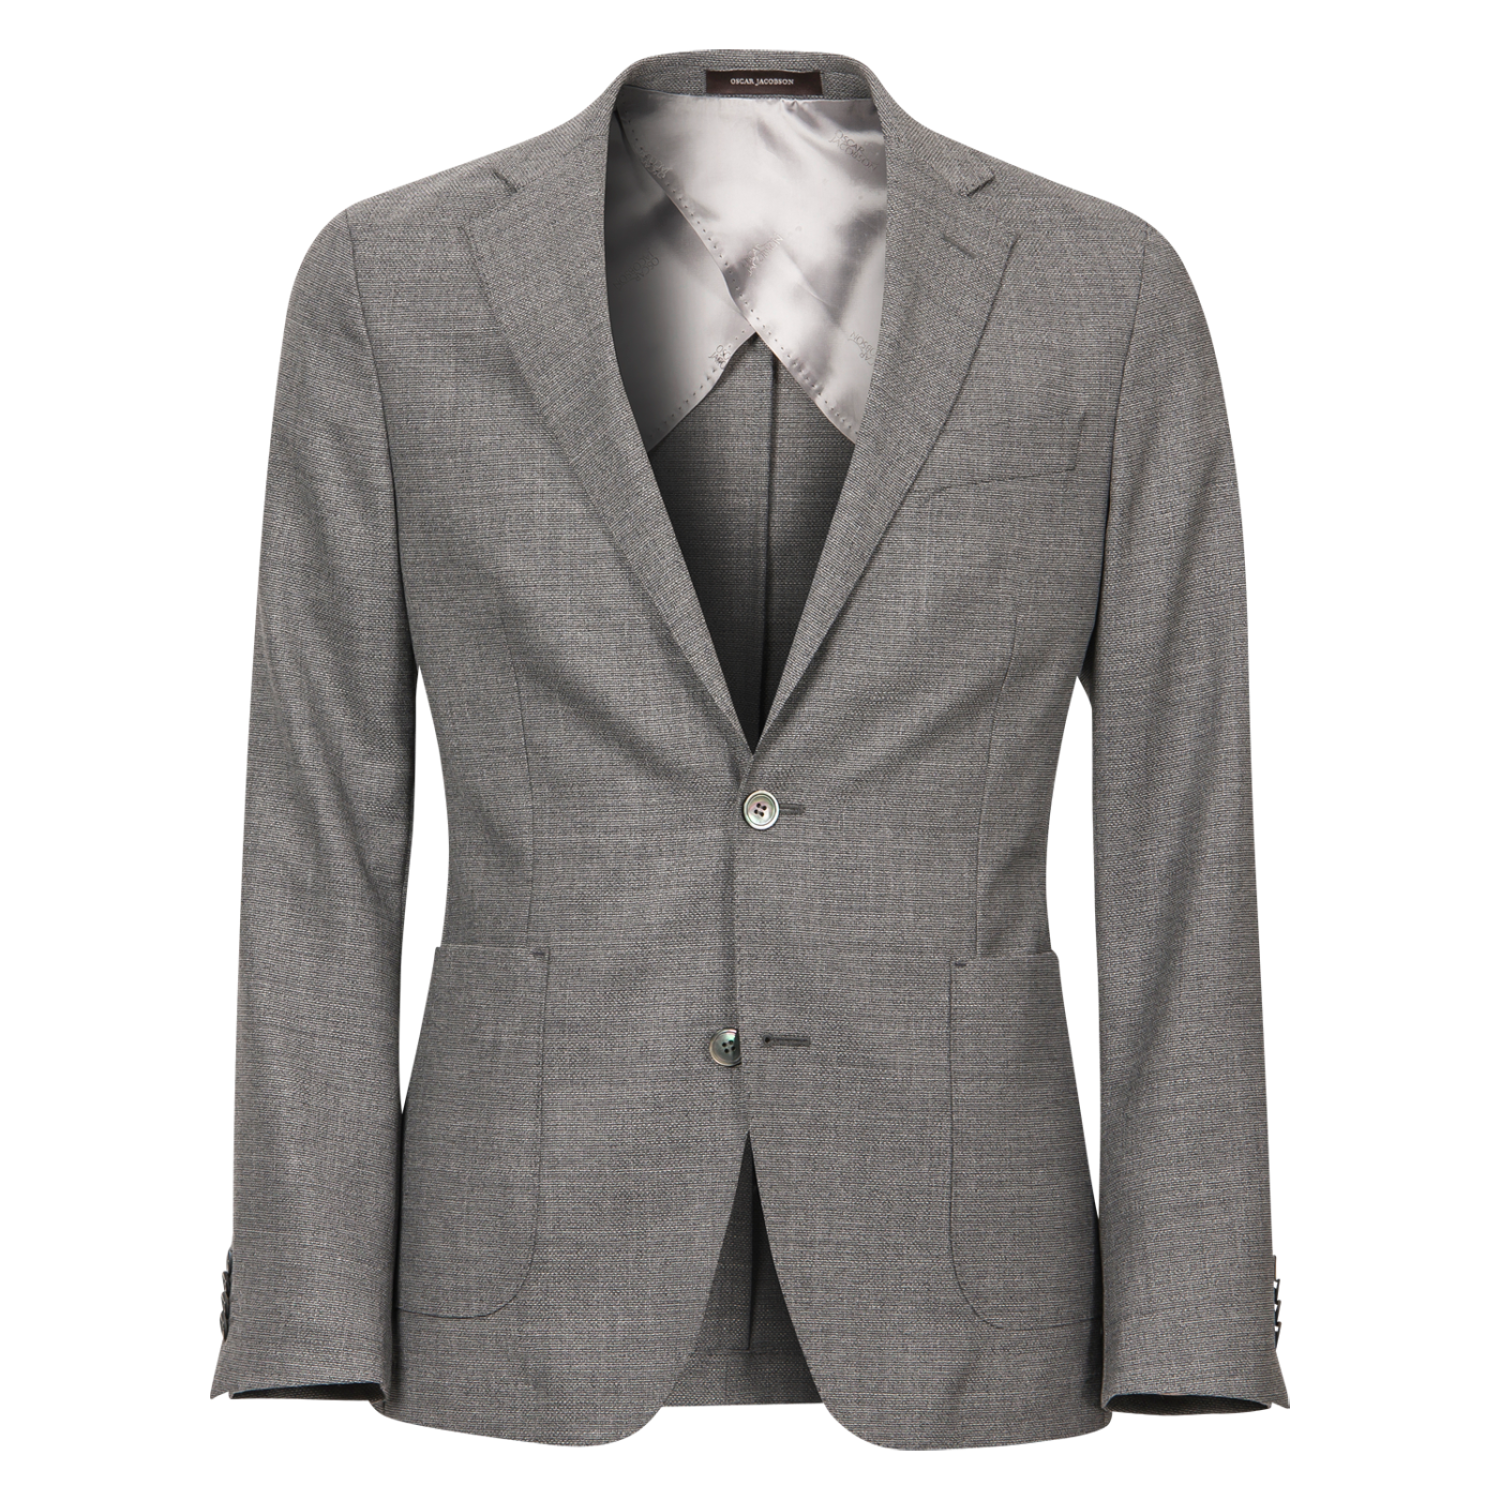 Blazer Free Clipart HD PNG Image